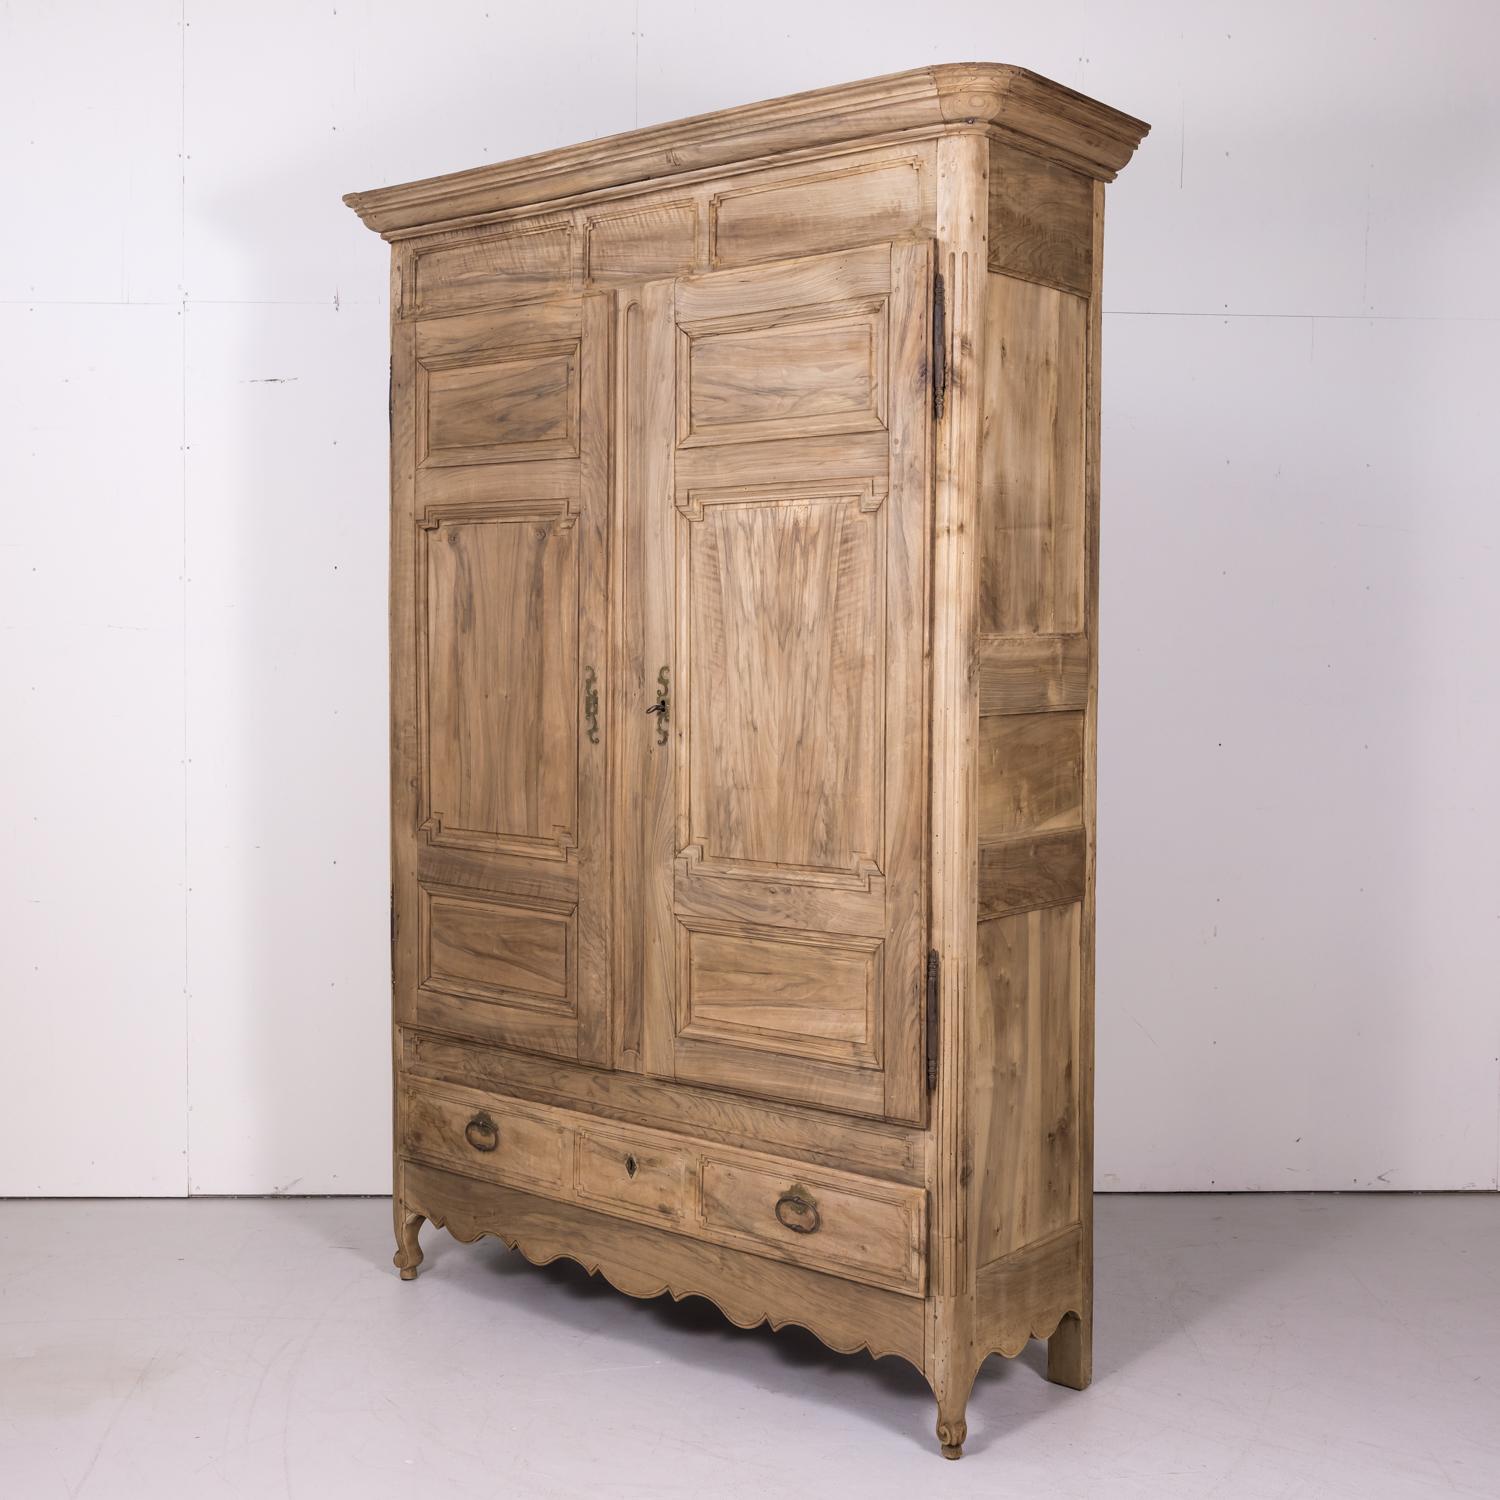 Rare 18th century bleached walnut armoire with bottom drawer handcrafted by skilled artisans in Provence near Arles during the French Transition period (1750-1775). Most Transition period pieces were created outside Paris by Provincial cabinet